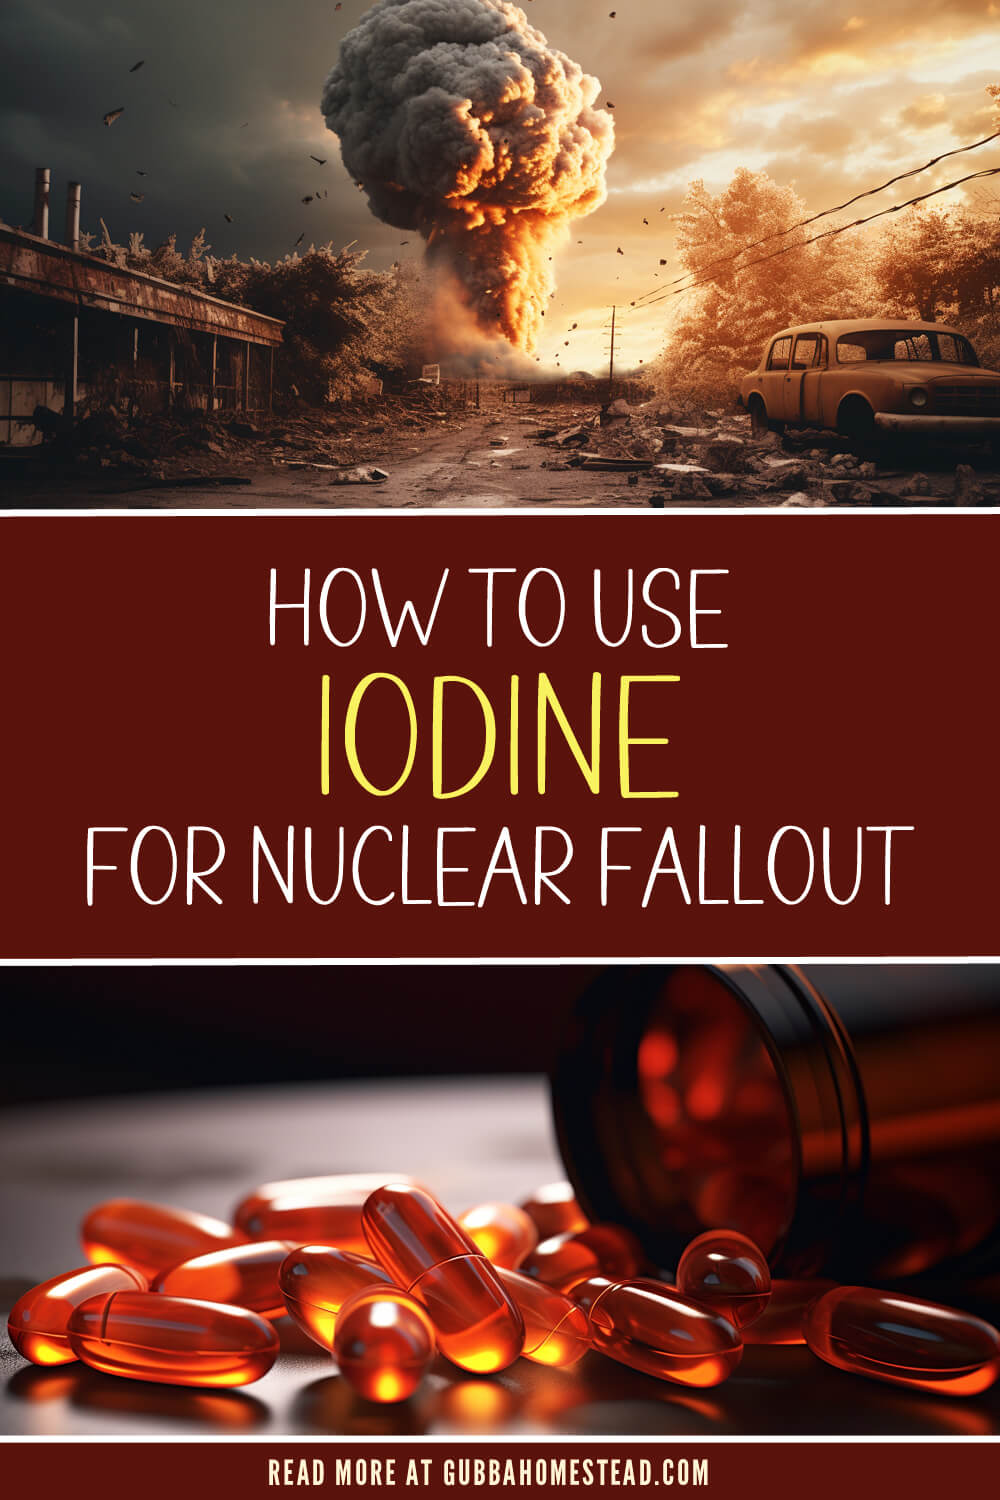 How To Use Iodine for Nuclear Fallout